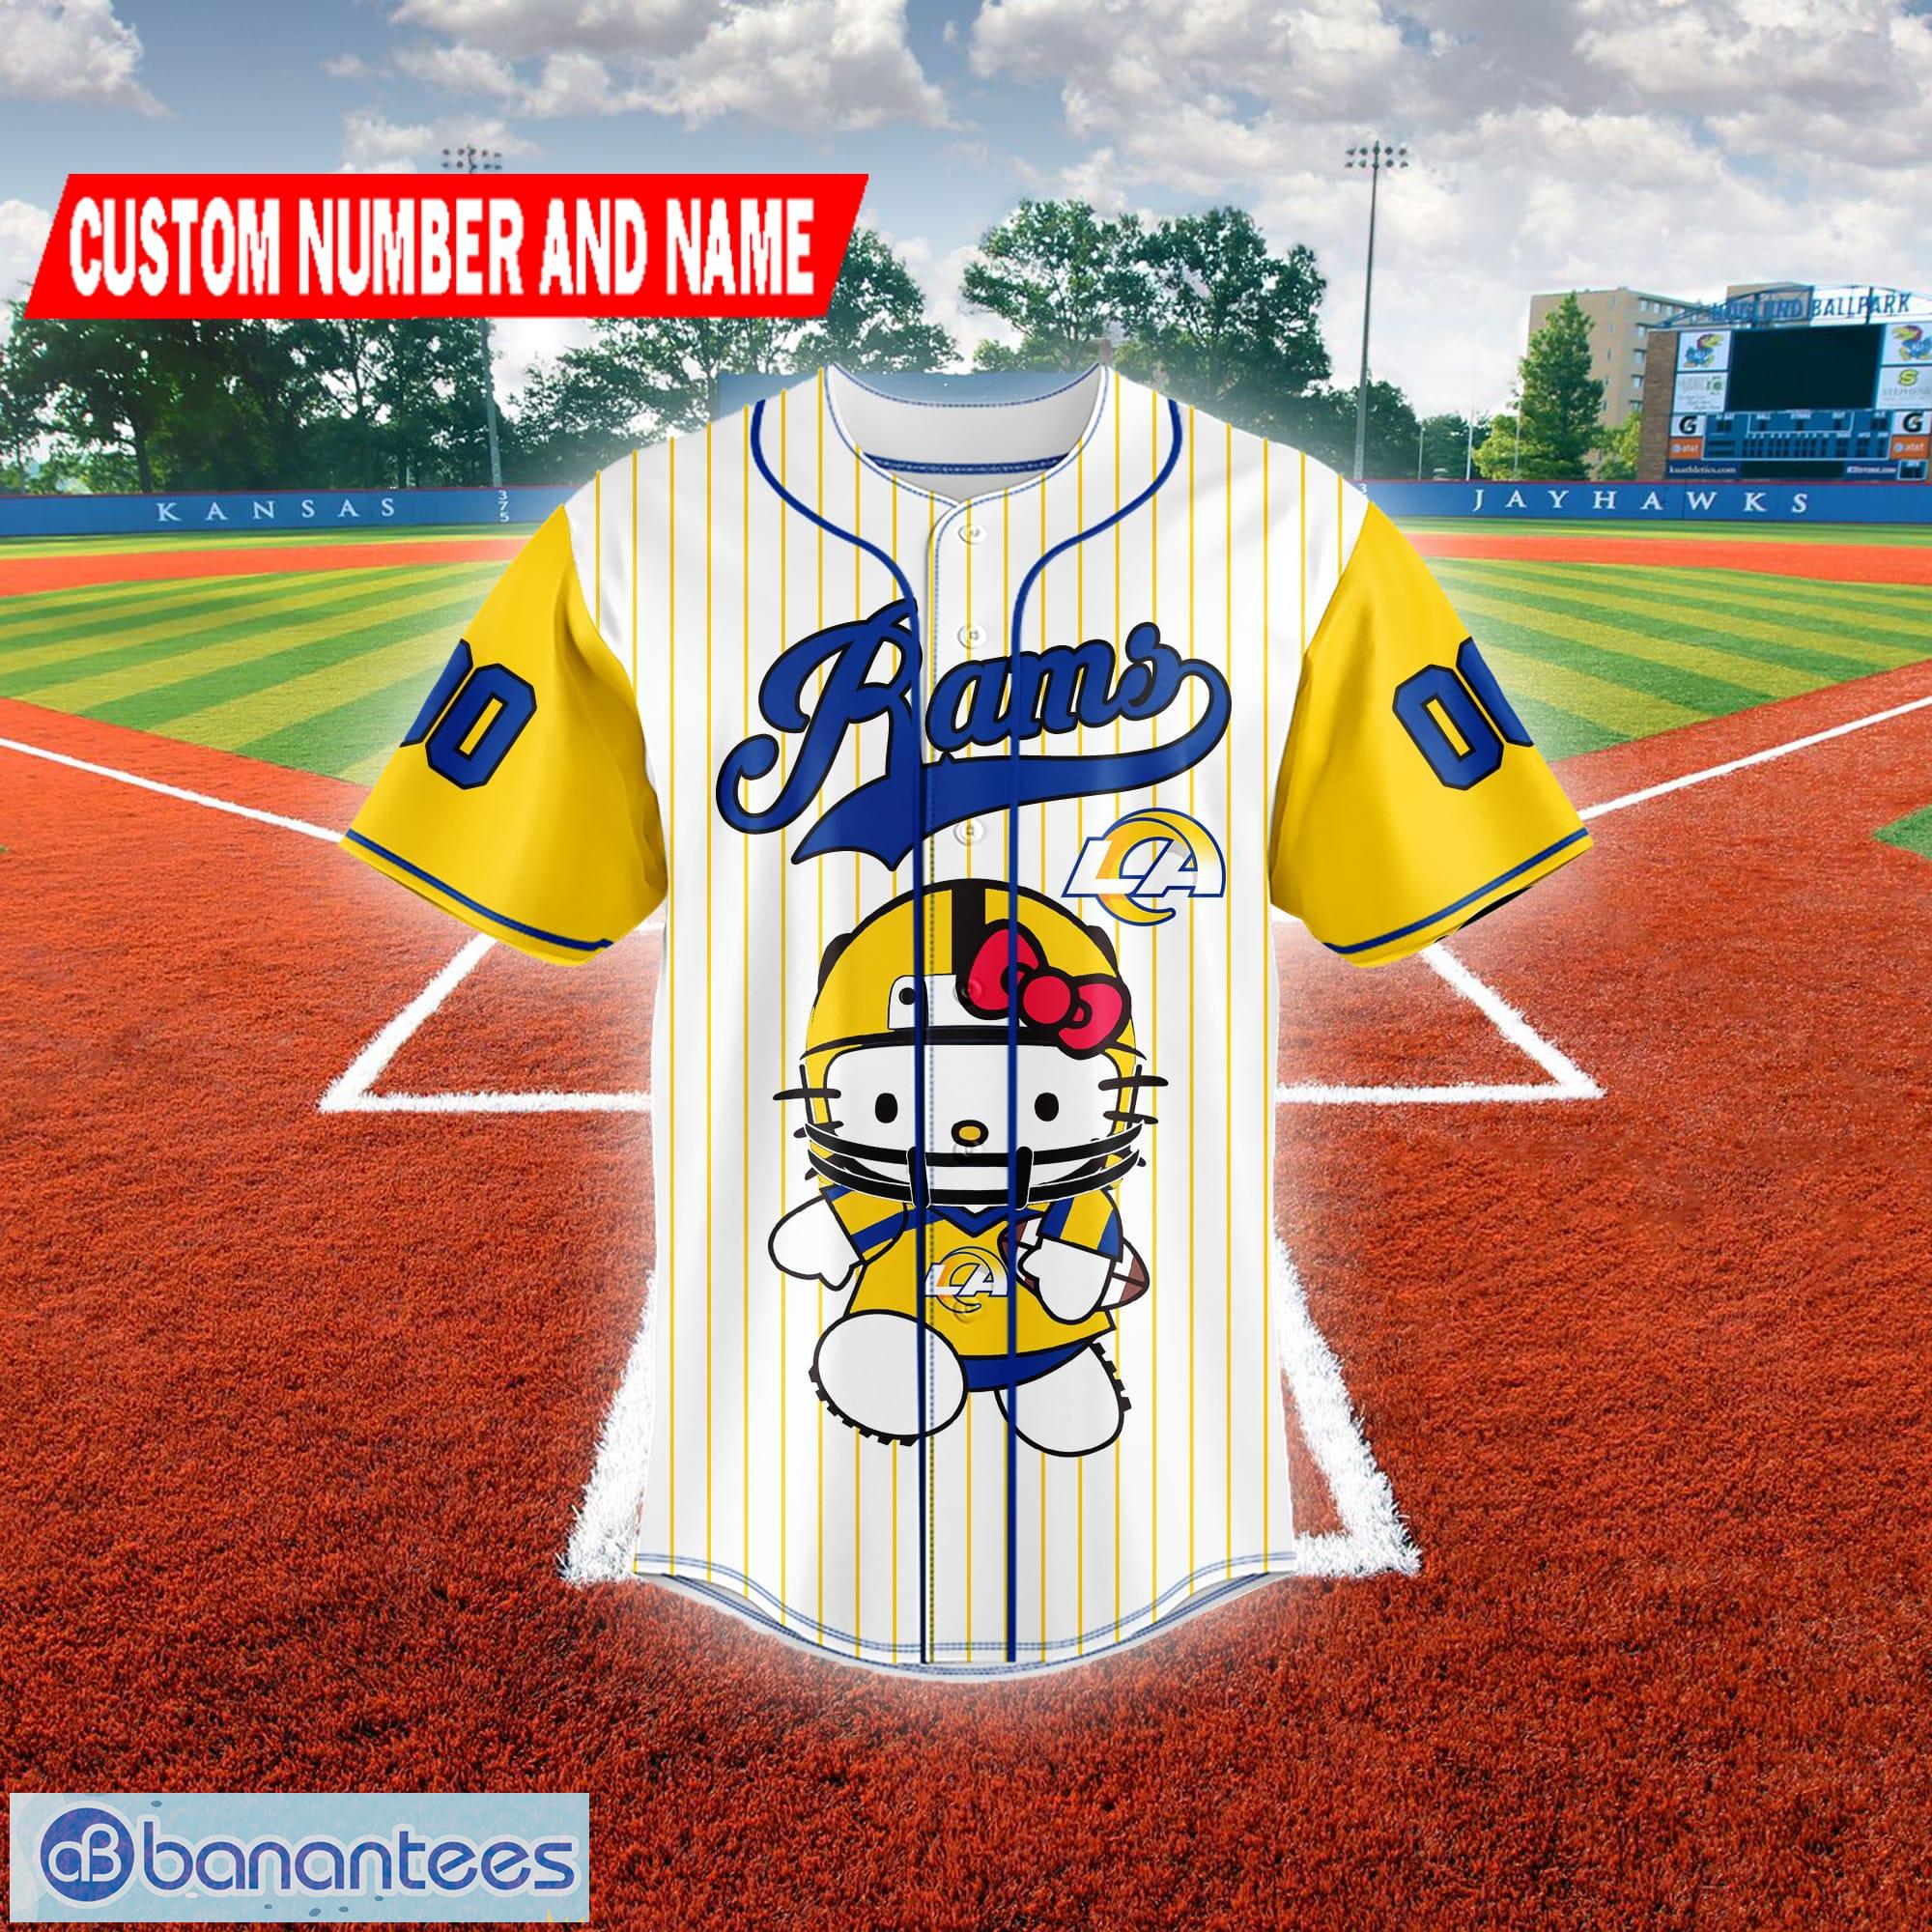 Los Angeles Rams-NFL BASEBALL JERSEY CUSTOM NAME AND NUMBER Best